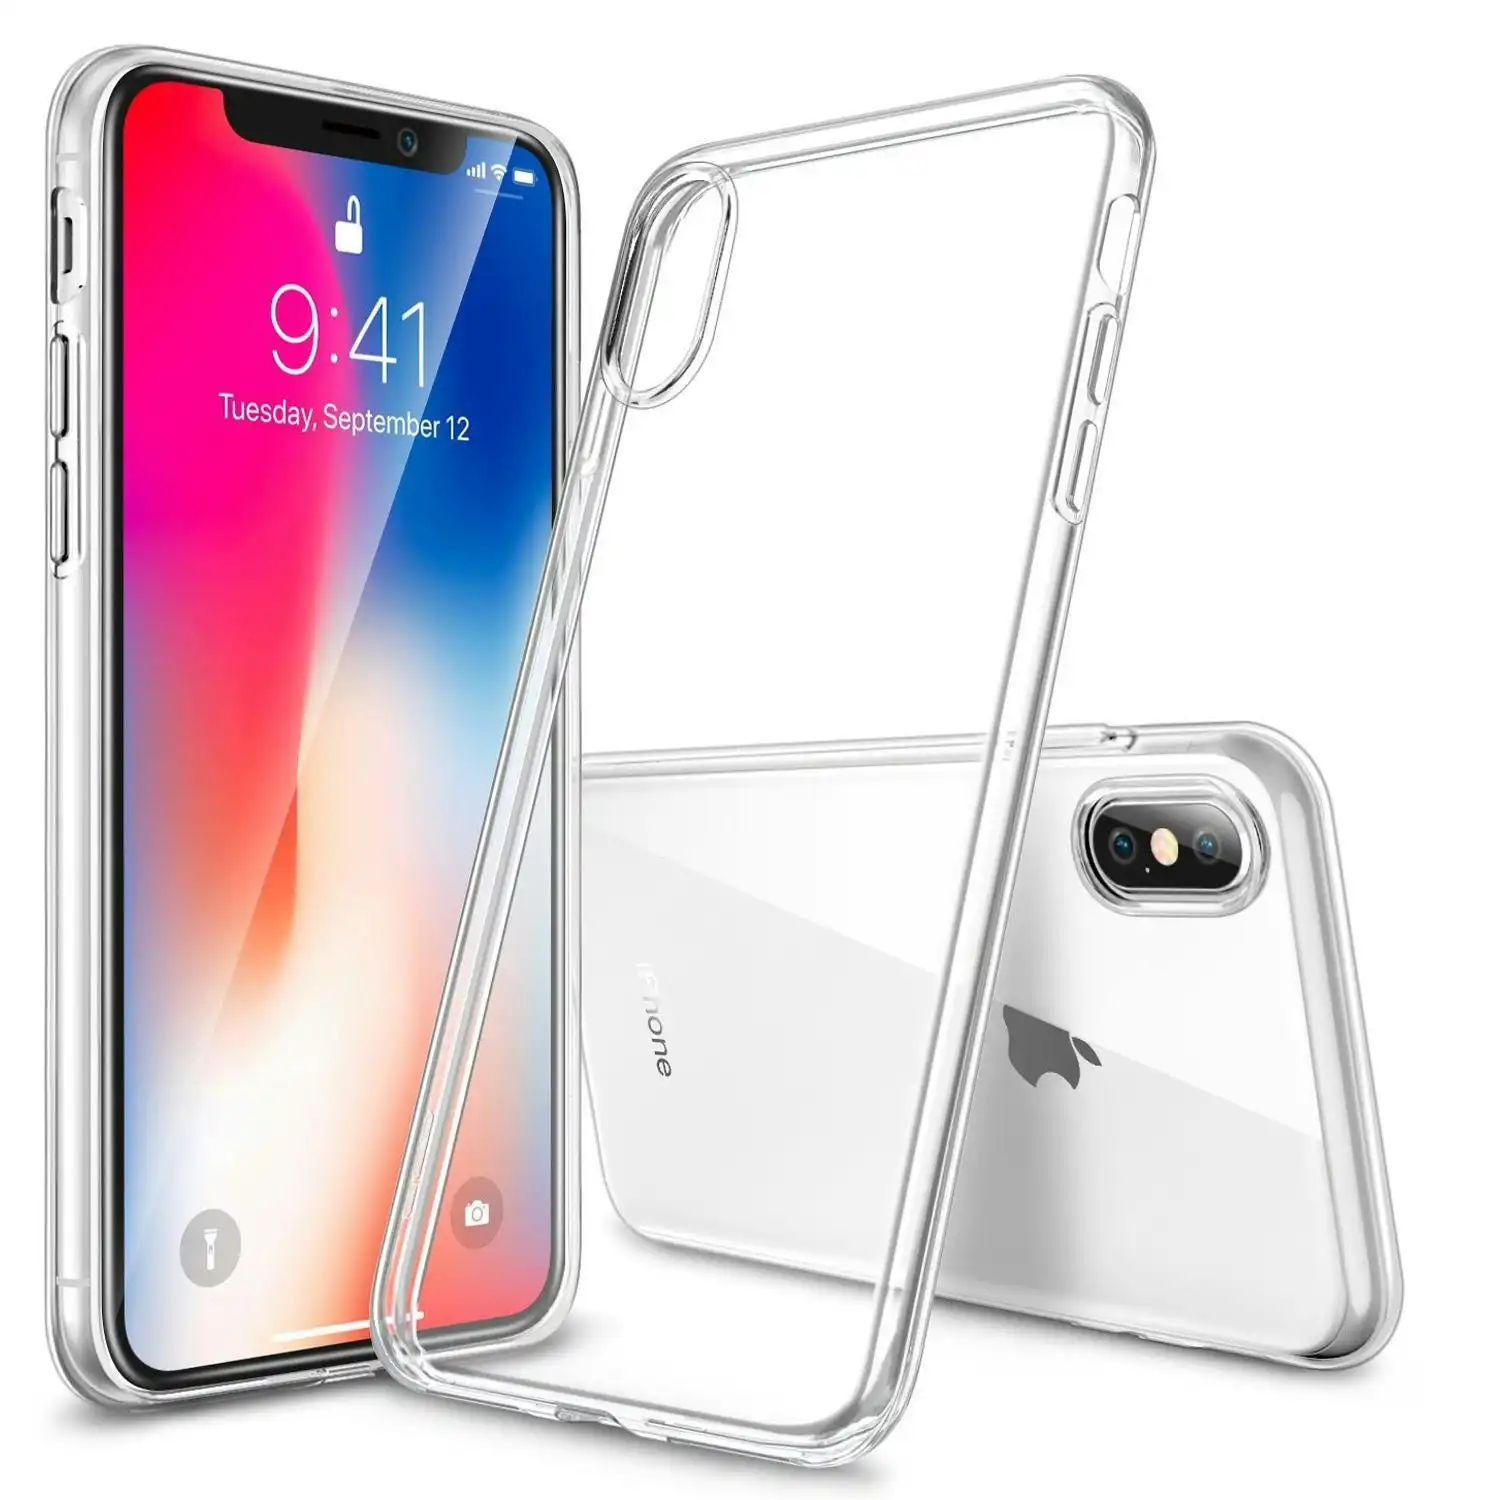 MEZON Crystal Clear Case for Apple iPhone X (5.8") Ultra Slim Premium TPU Gel – Wireless Charging Compatible